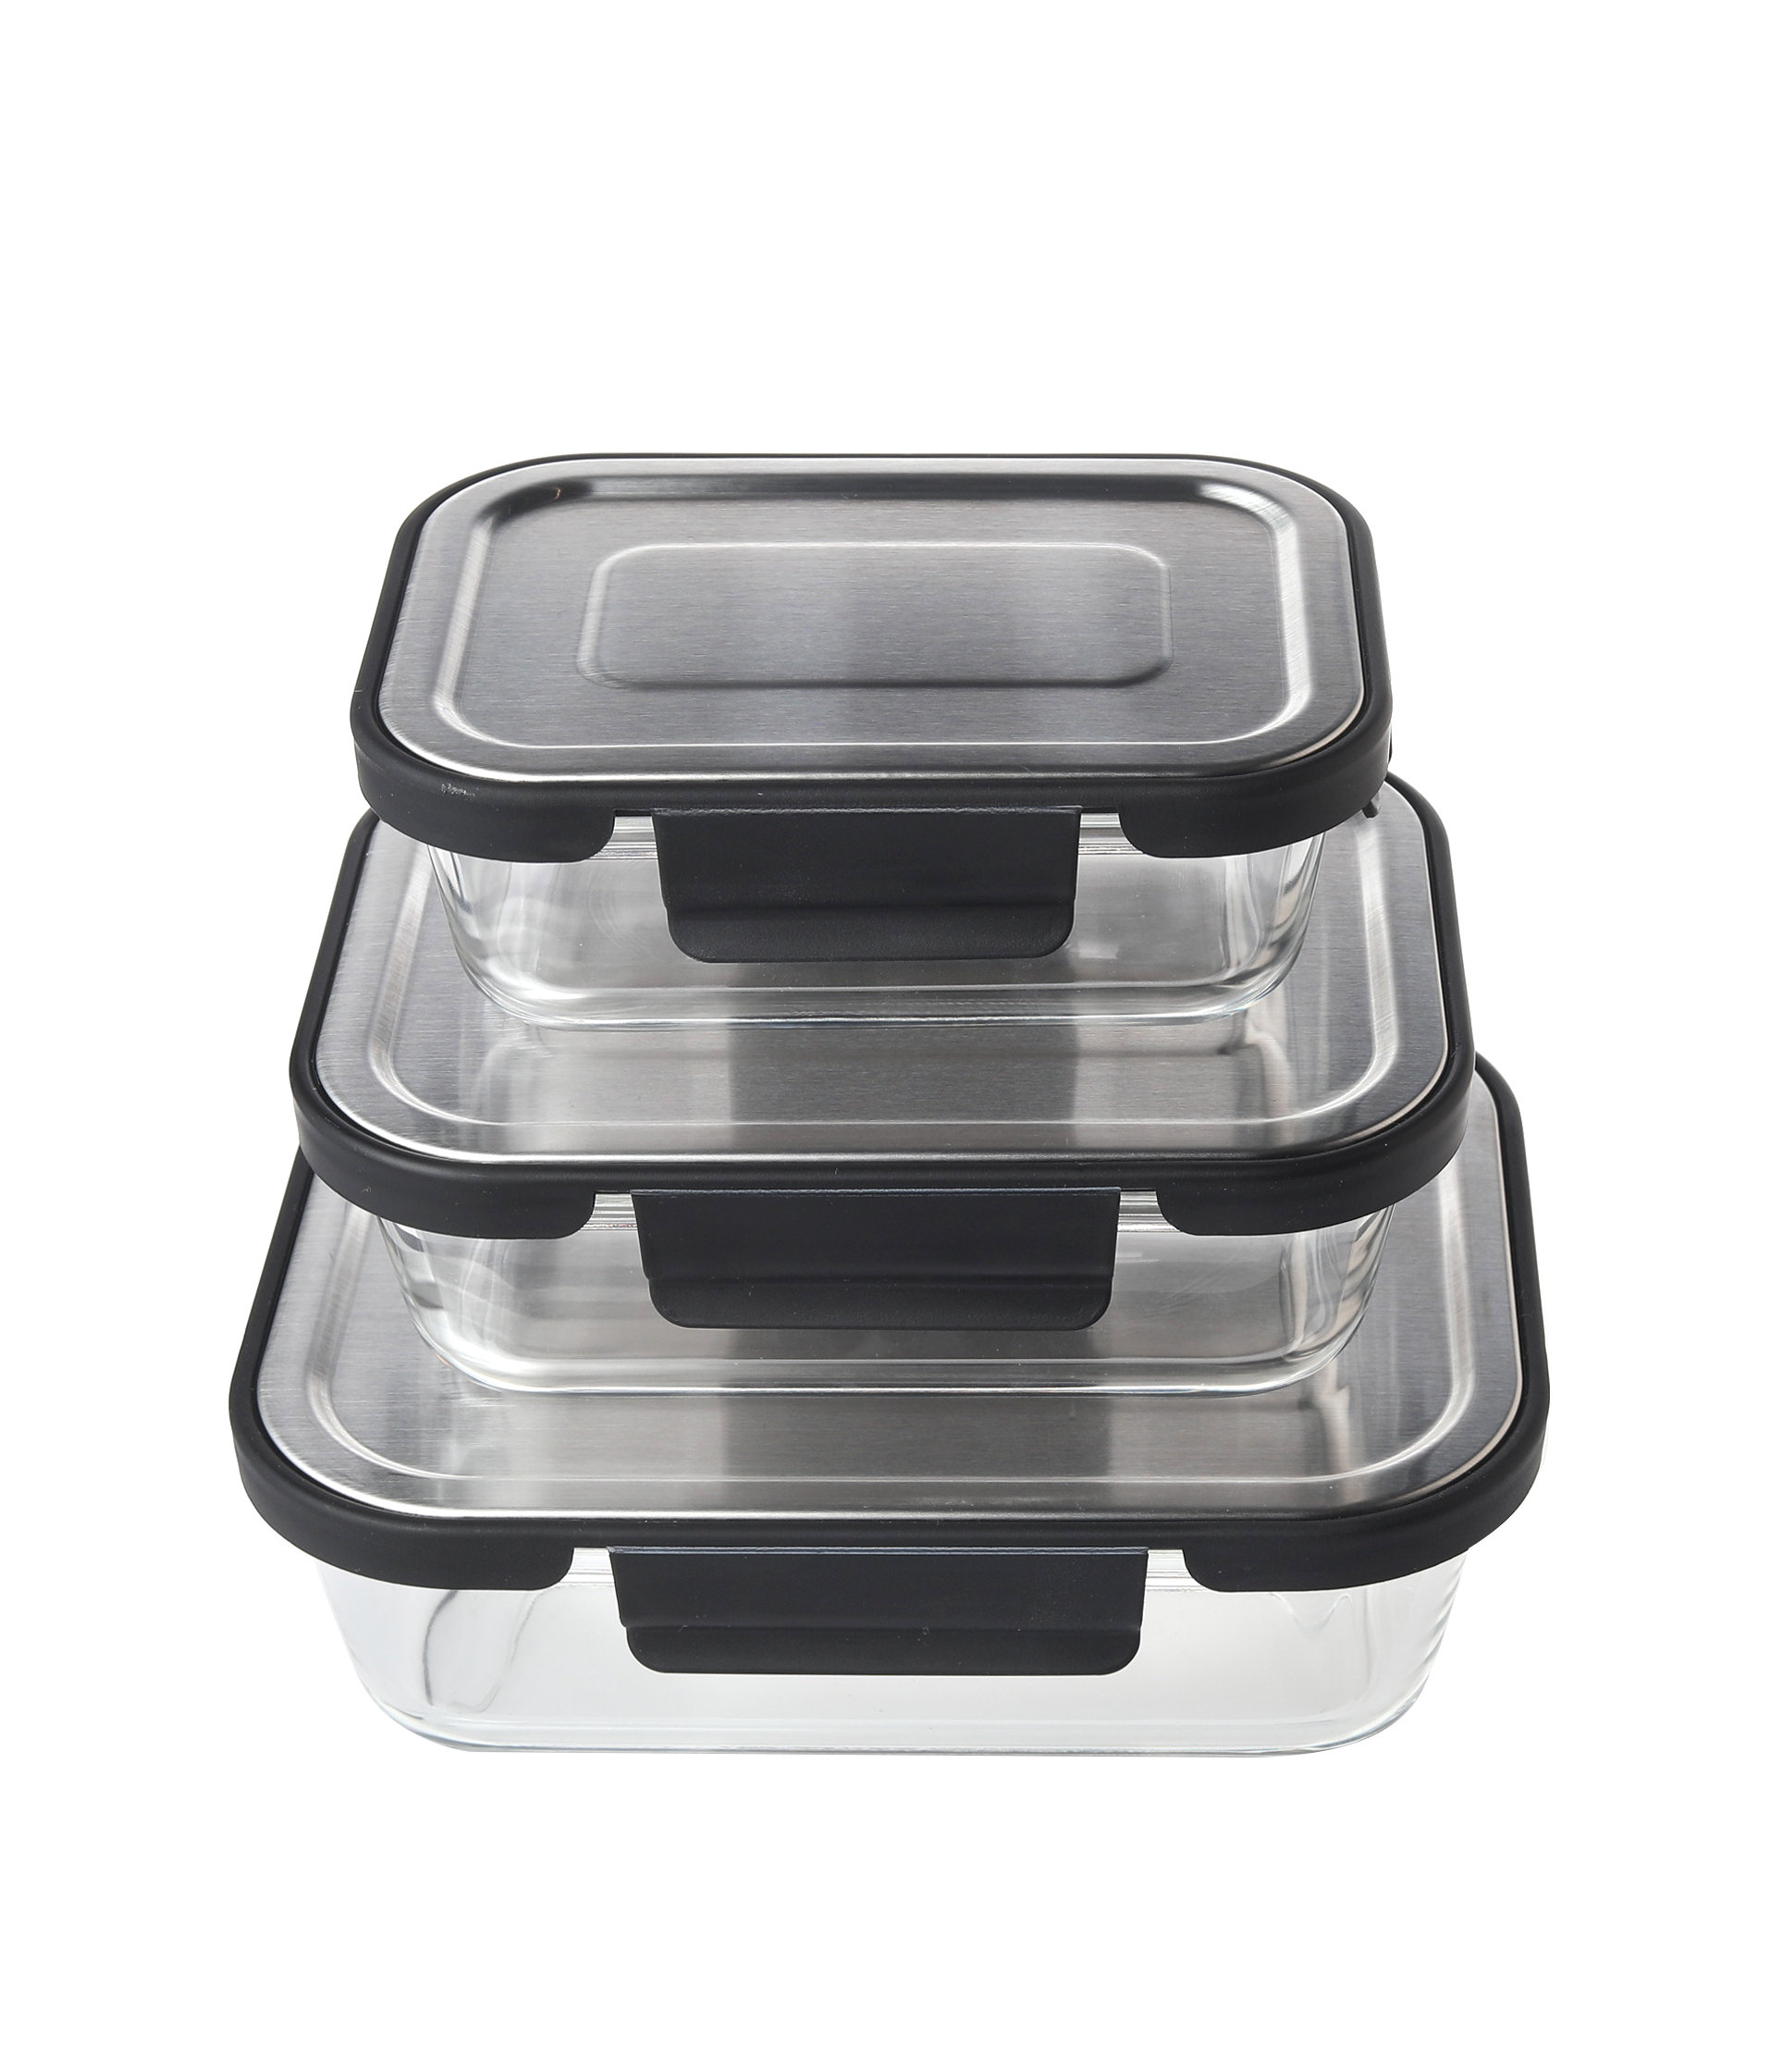 Superio Storage Bins with Lids- Clear Boxes for Organizing, Stackable  Plastic Containers- BPA Free, Non-Toxic, Odor Free, Organizer for Home,  Office